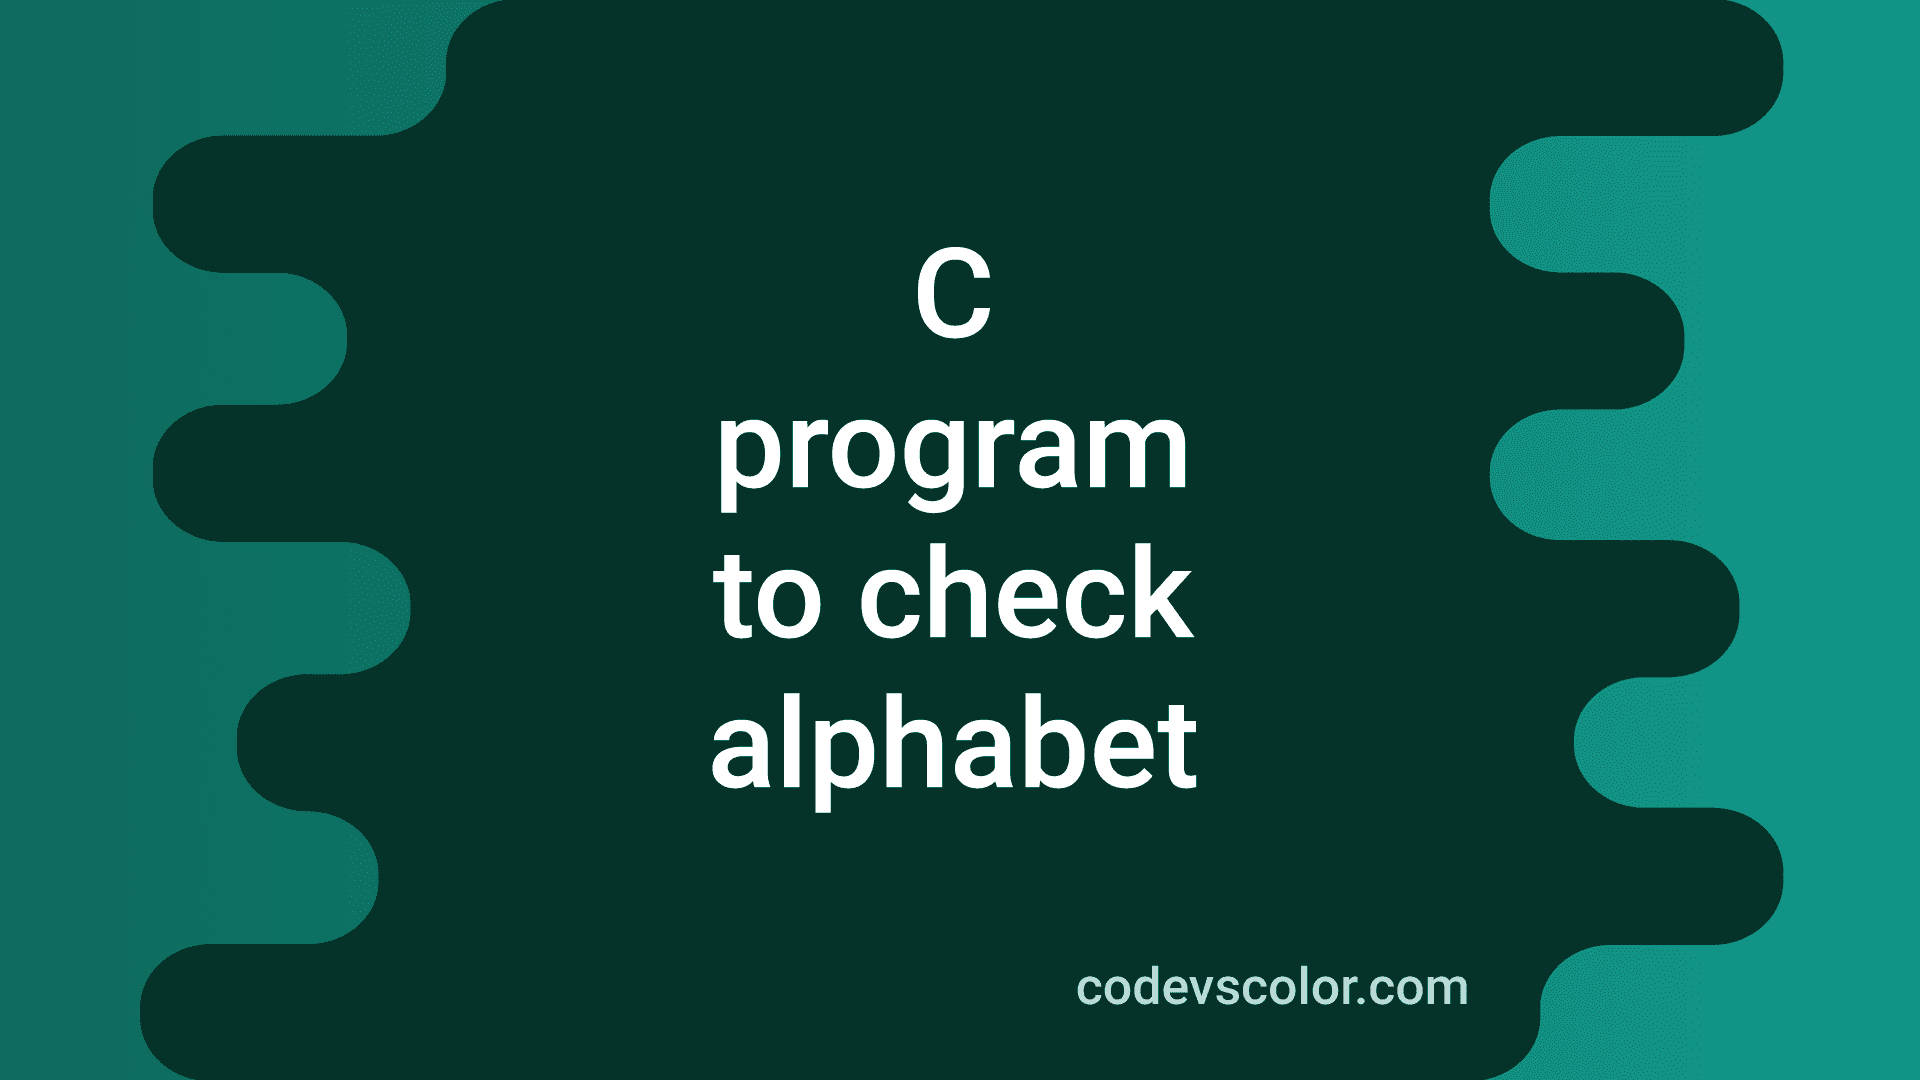 c-program-to-check-if-a-character-is-an-alphabet-or-not-codevscolor